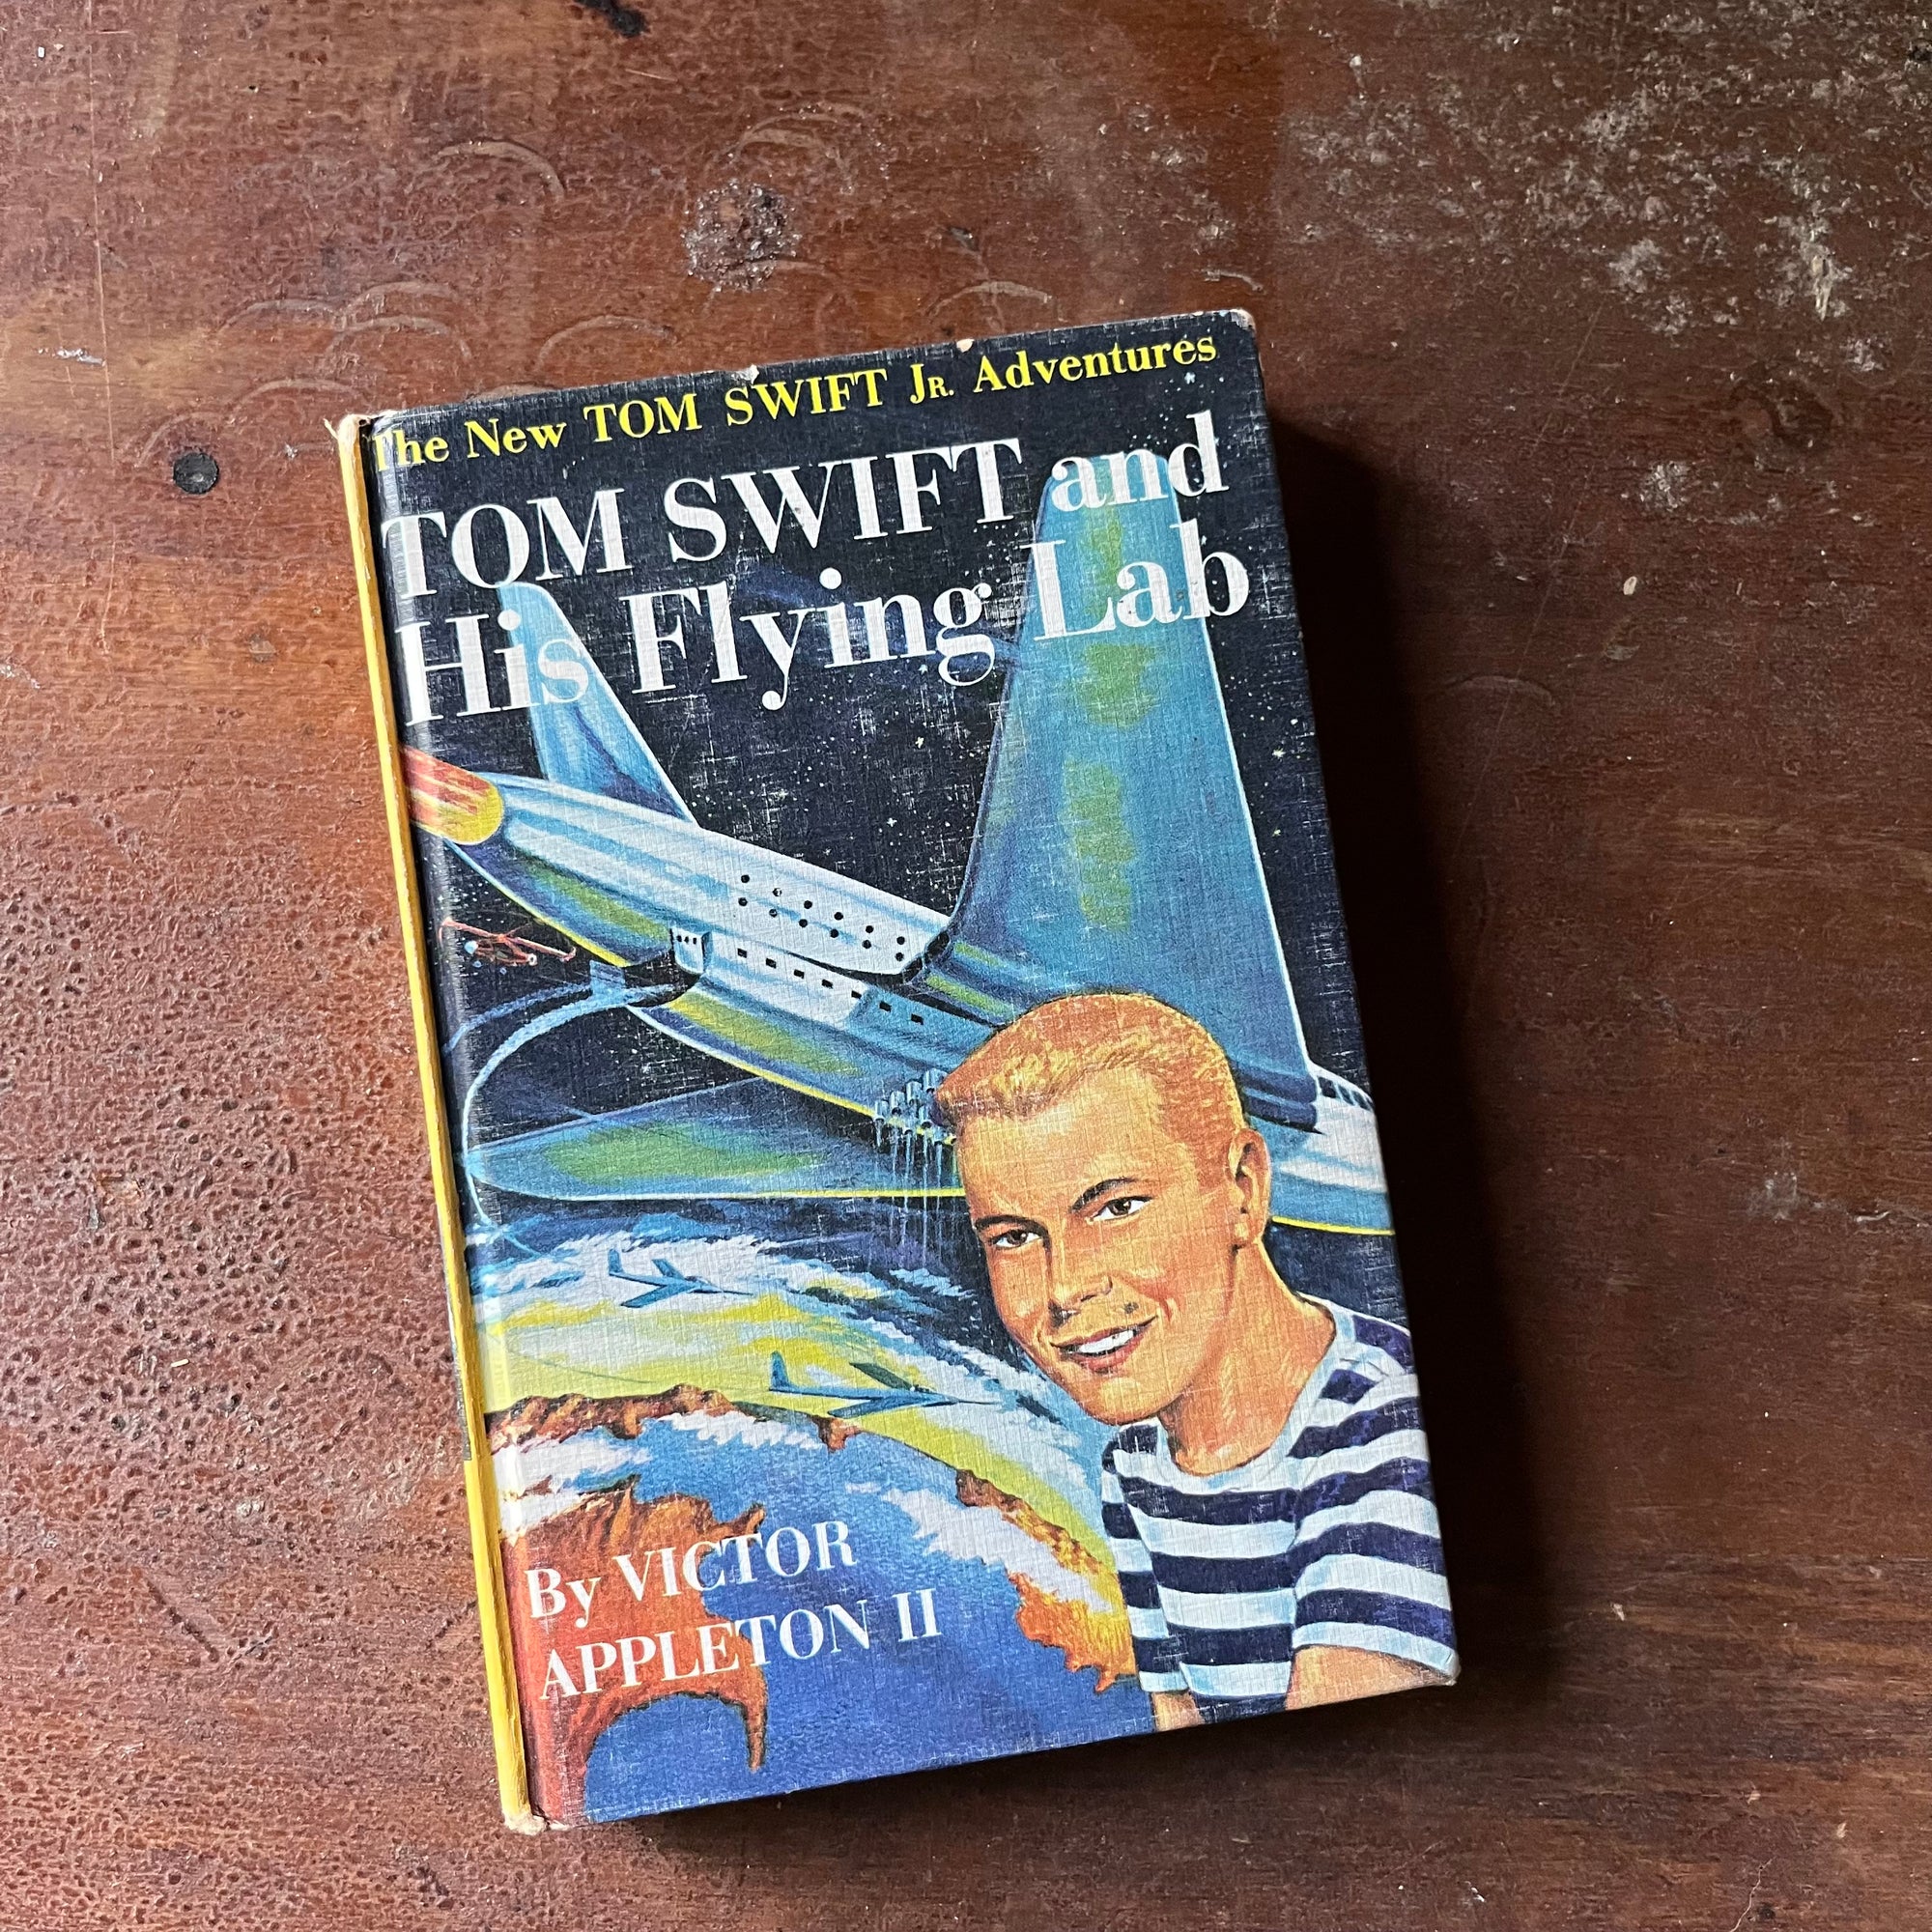 vintage children's adventure story, The New Tom Swift Jr. Adventures Book - Tom Swift and His Flying Lab written by Victor Appleton II with illustrations by Graham Kaye - view of the front cover